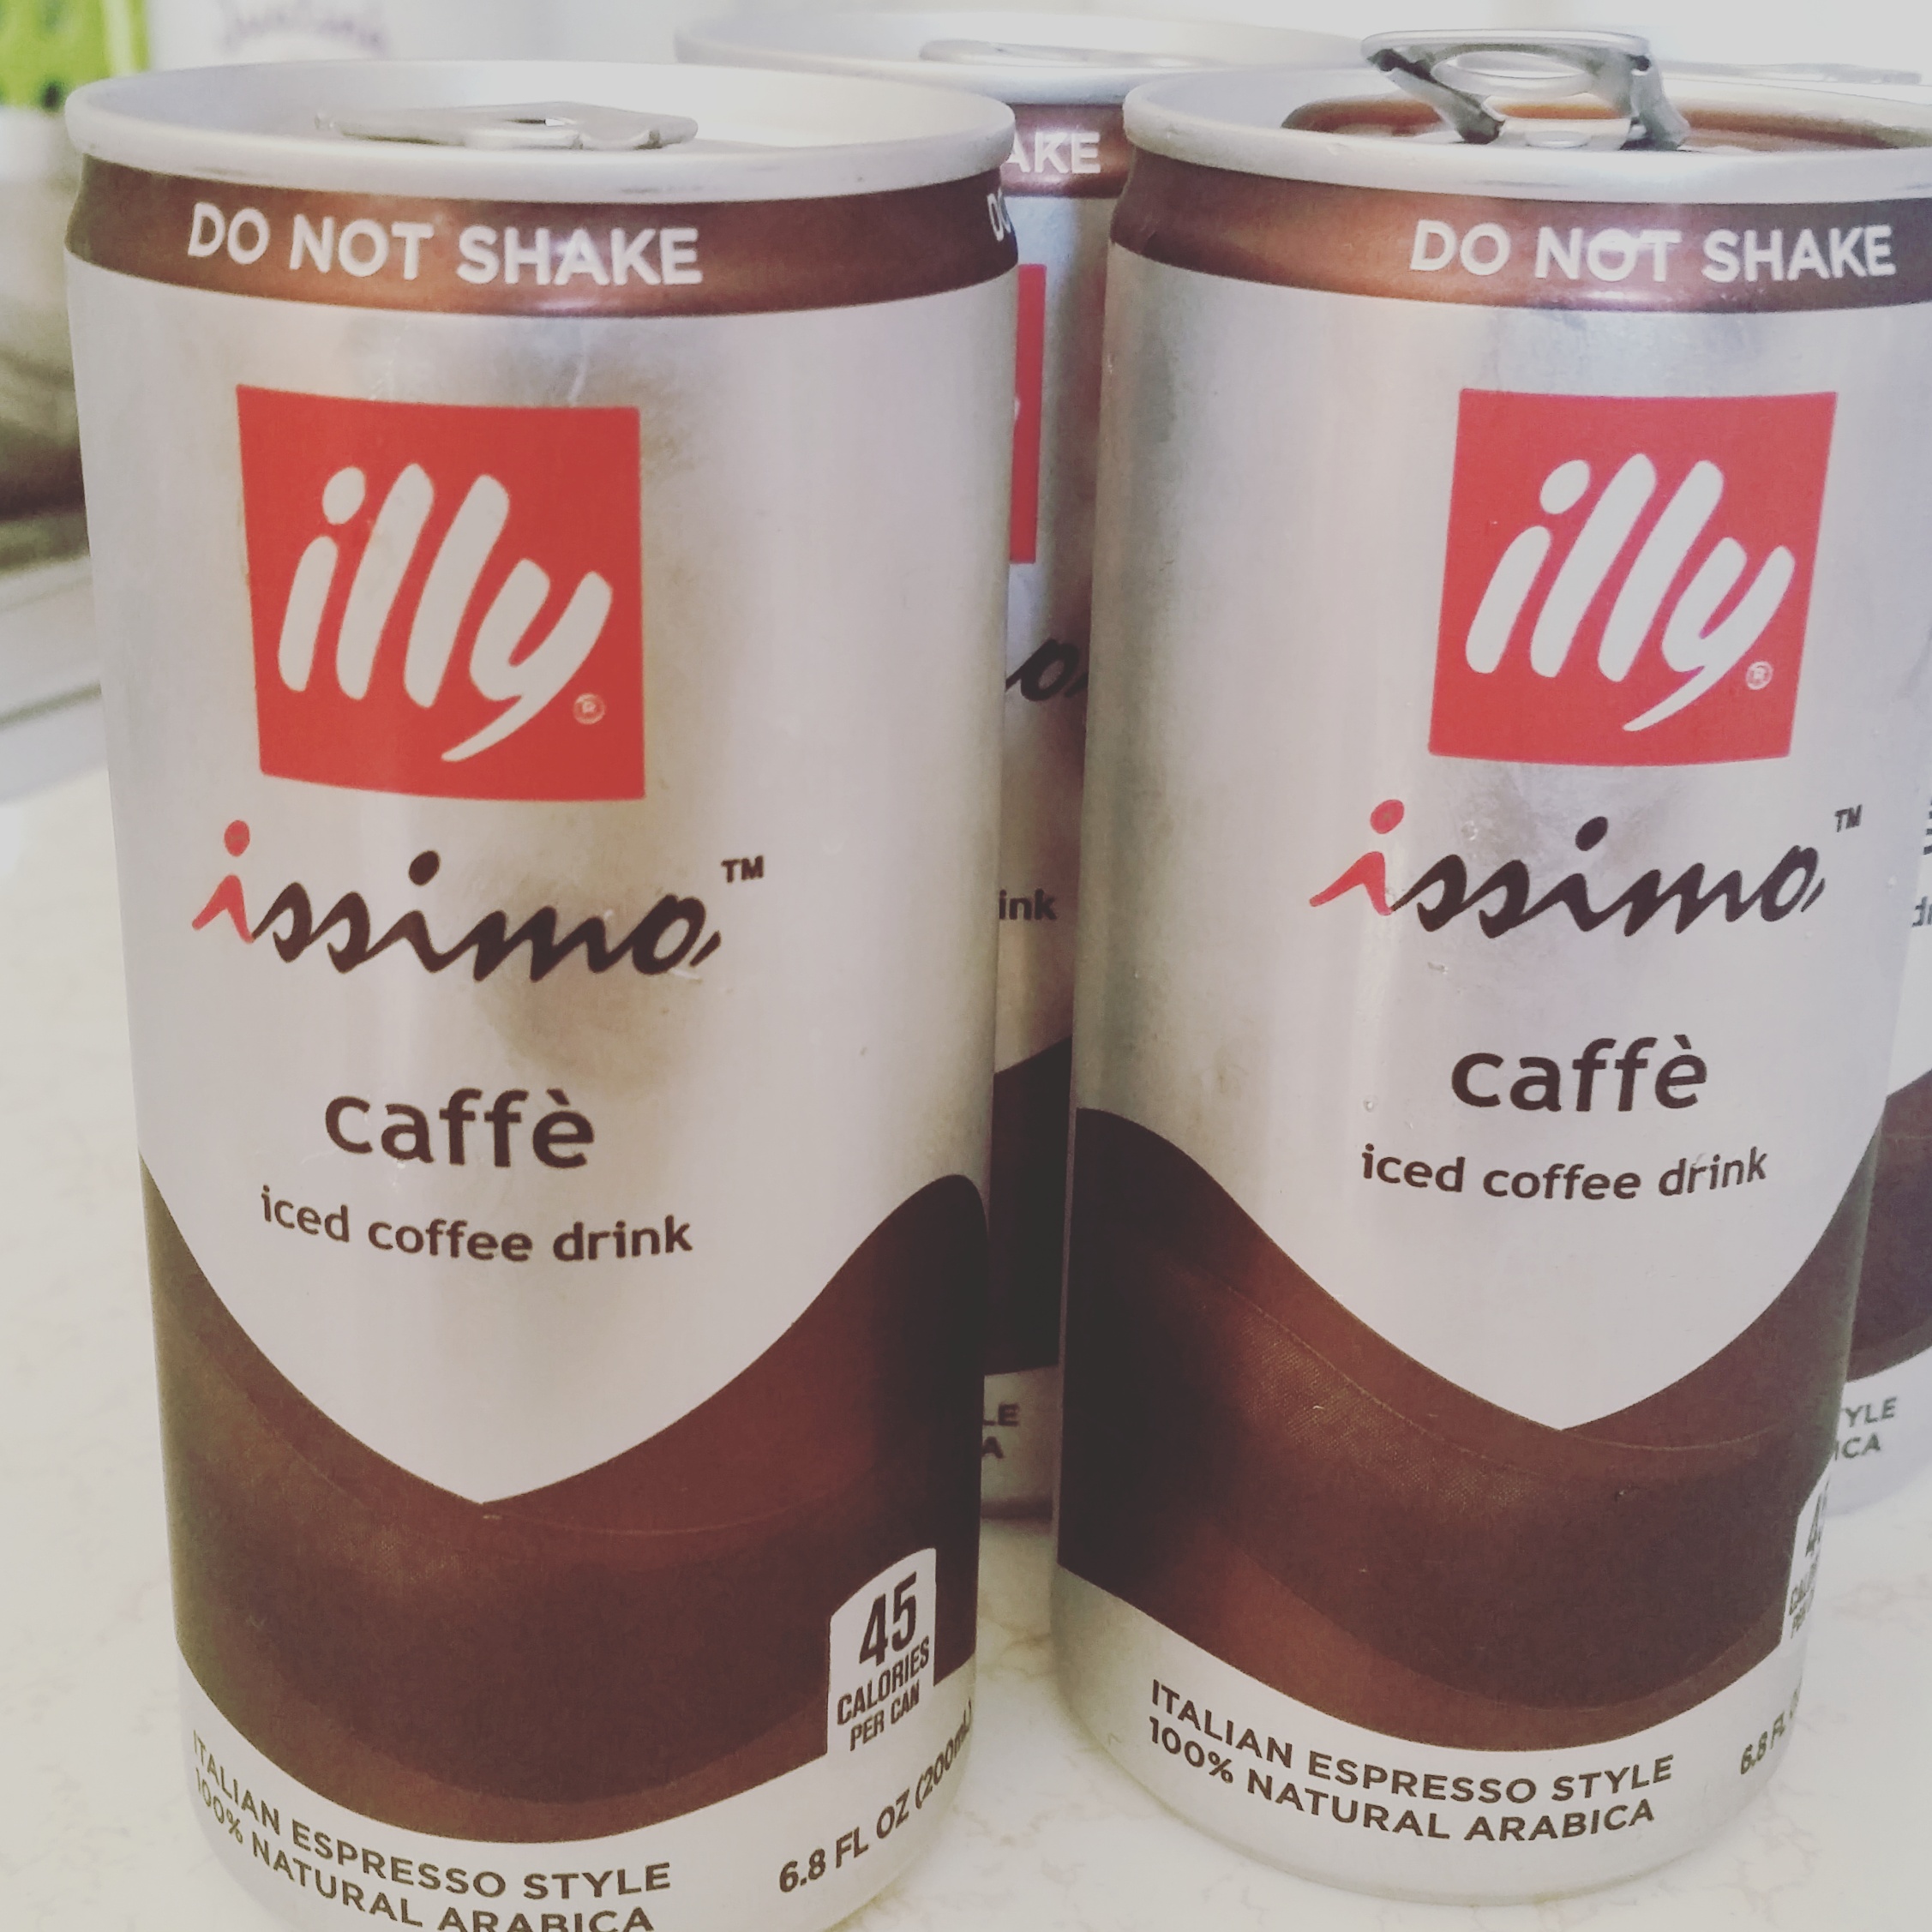 Illy Issimo Caffe espresso ready tp drink can